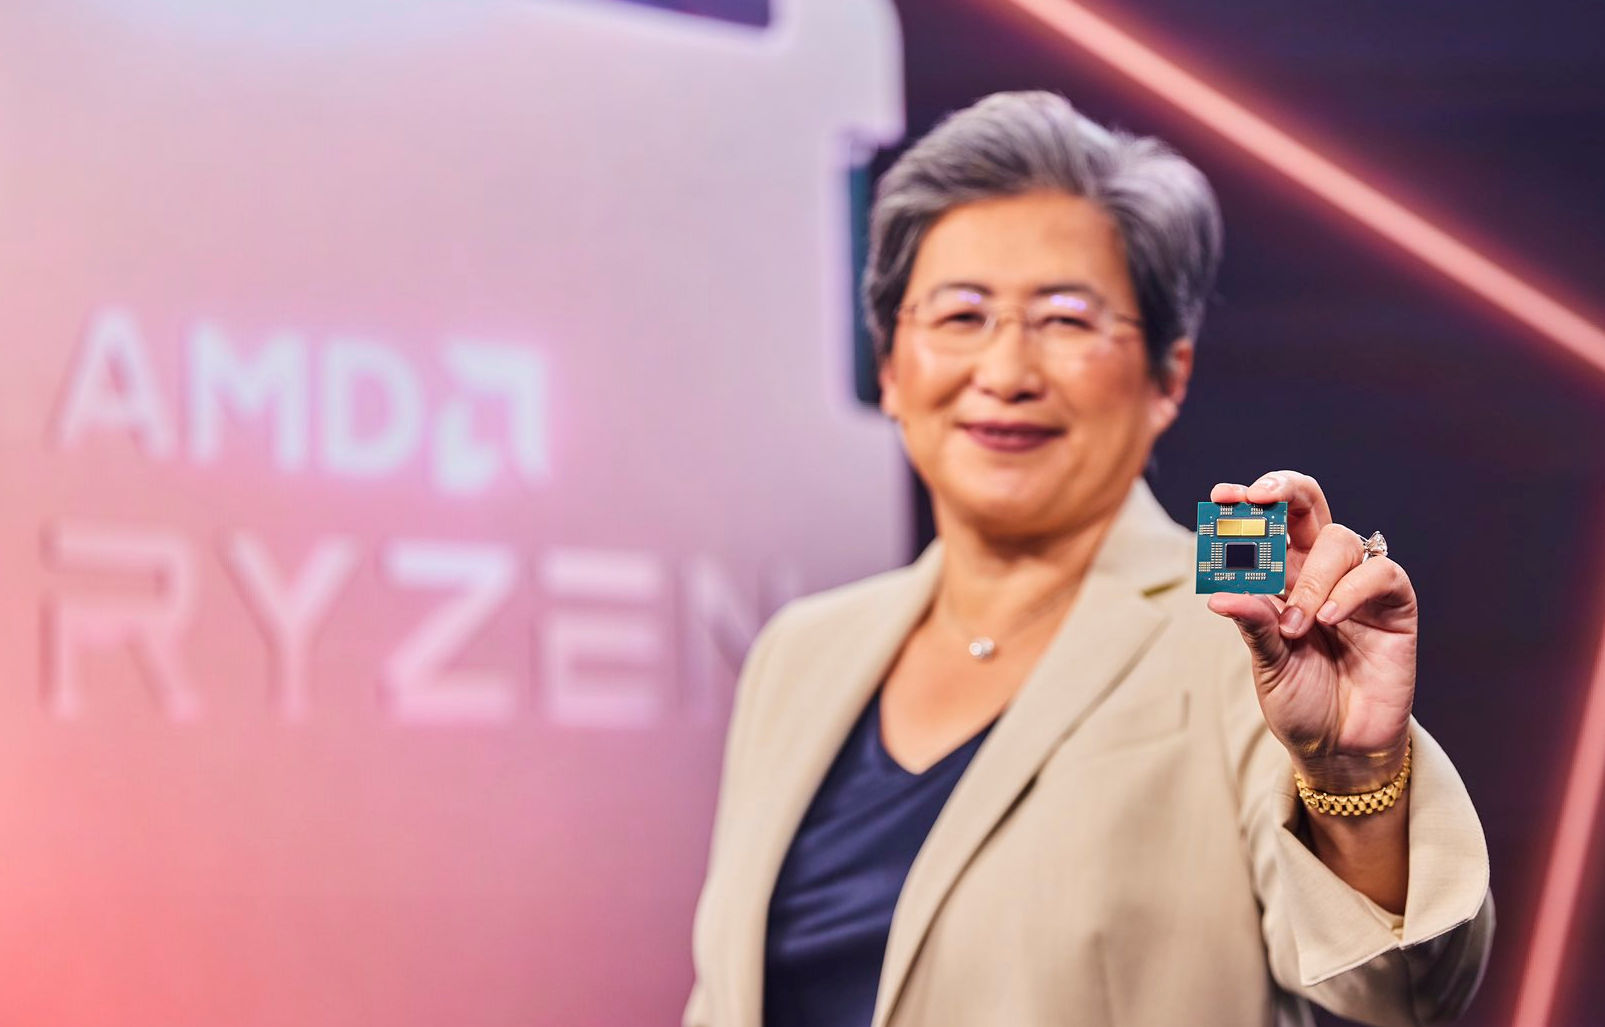 AMD Ryzen 7000 series to be unveiled this month According to Wccftech, AMD has set the date for hard launch of the new desktop Zen4 CPUs. This is a follow-up to official confirmation to AMD releasing Ryzen 7000 series this quarter. AMD CEO Lisa Su narrowed down the release date during the Q&A session regarding […]